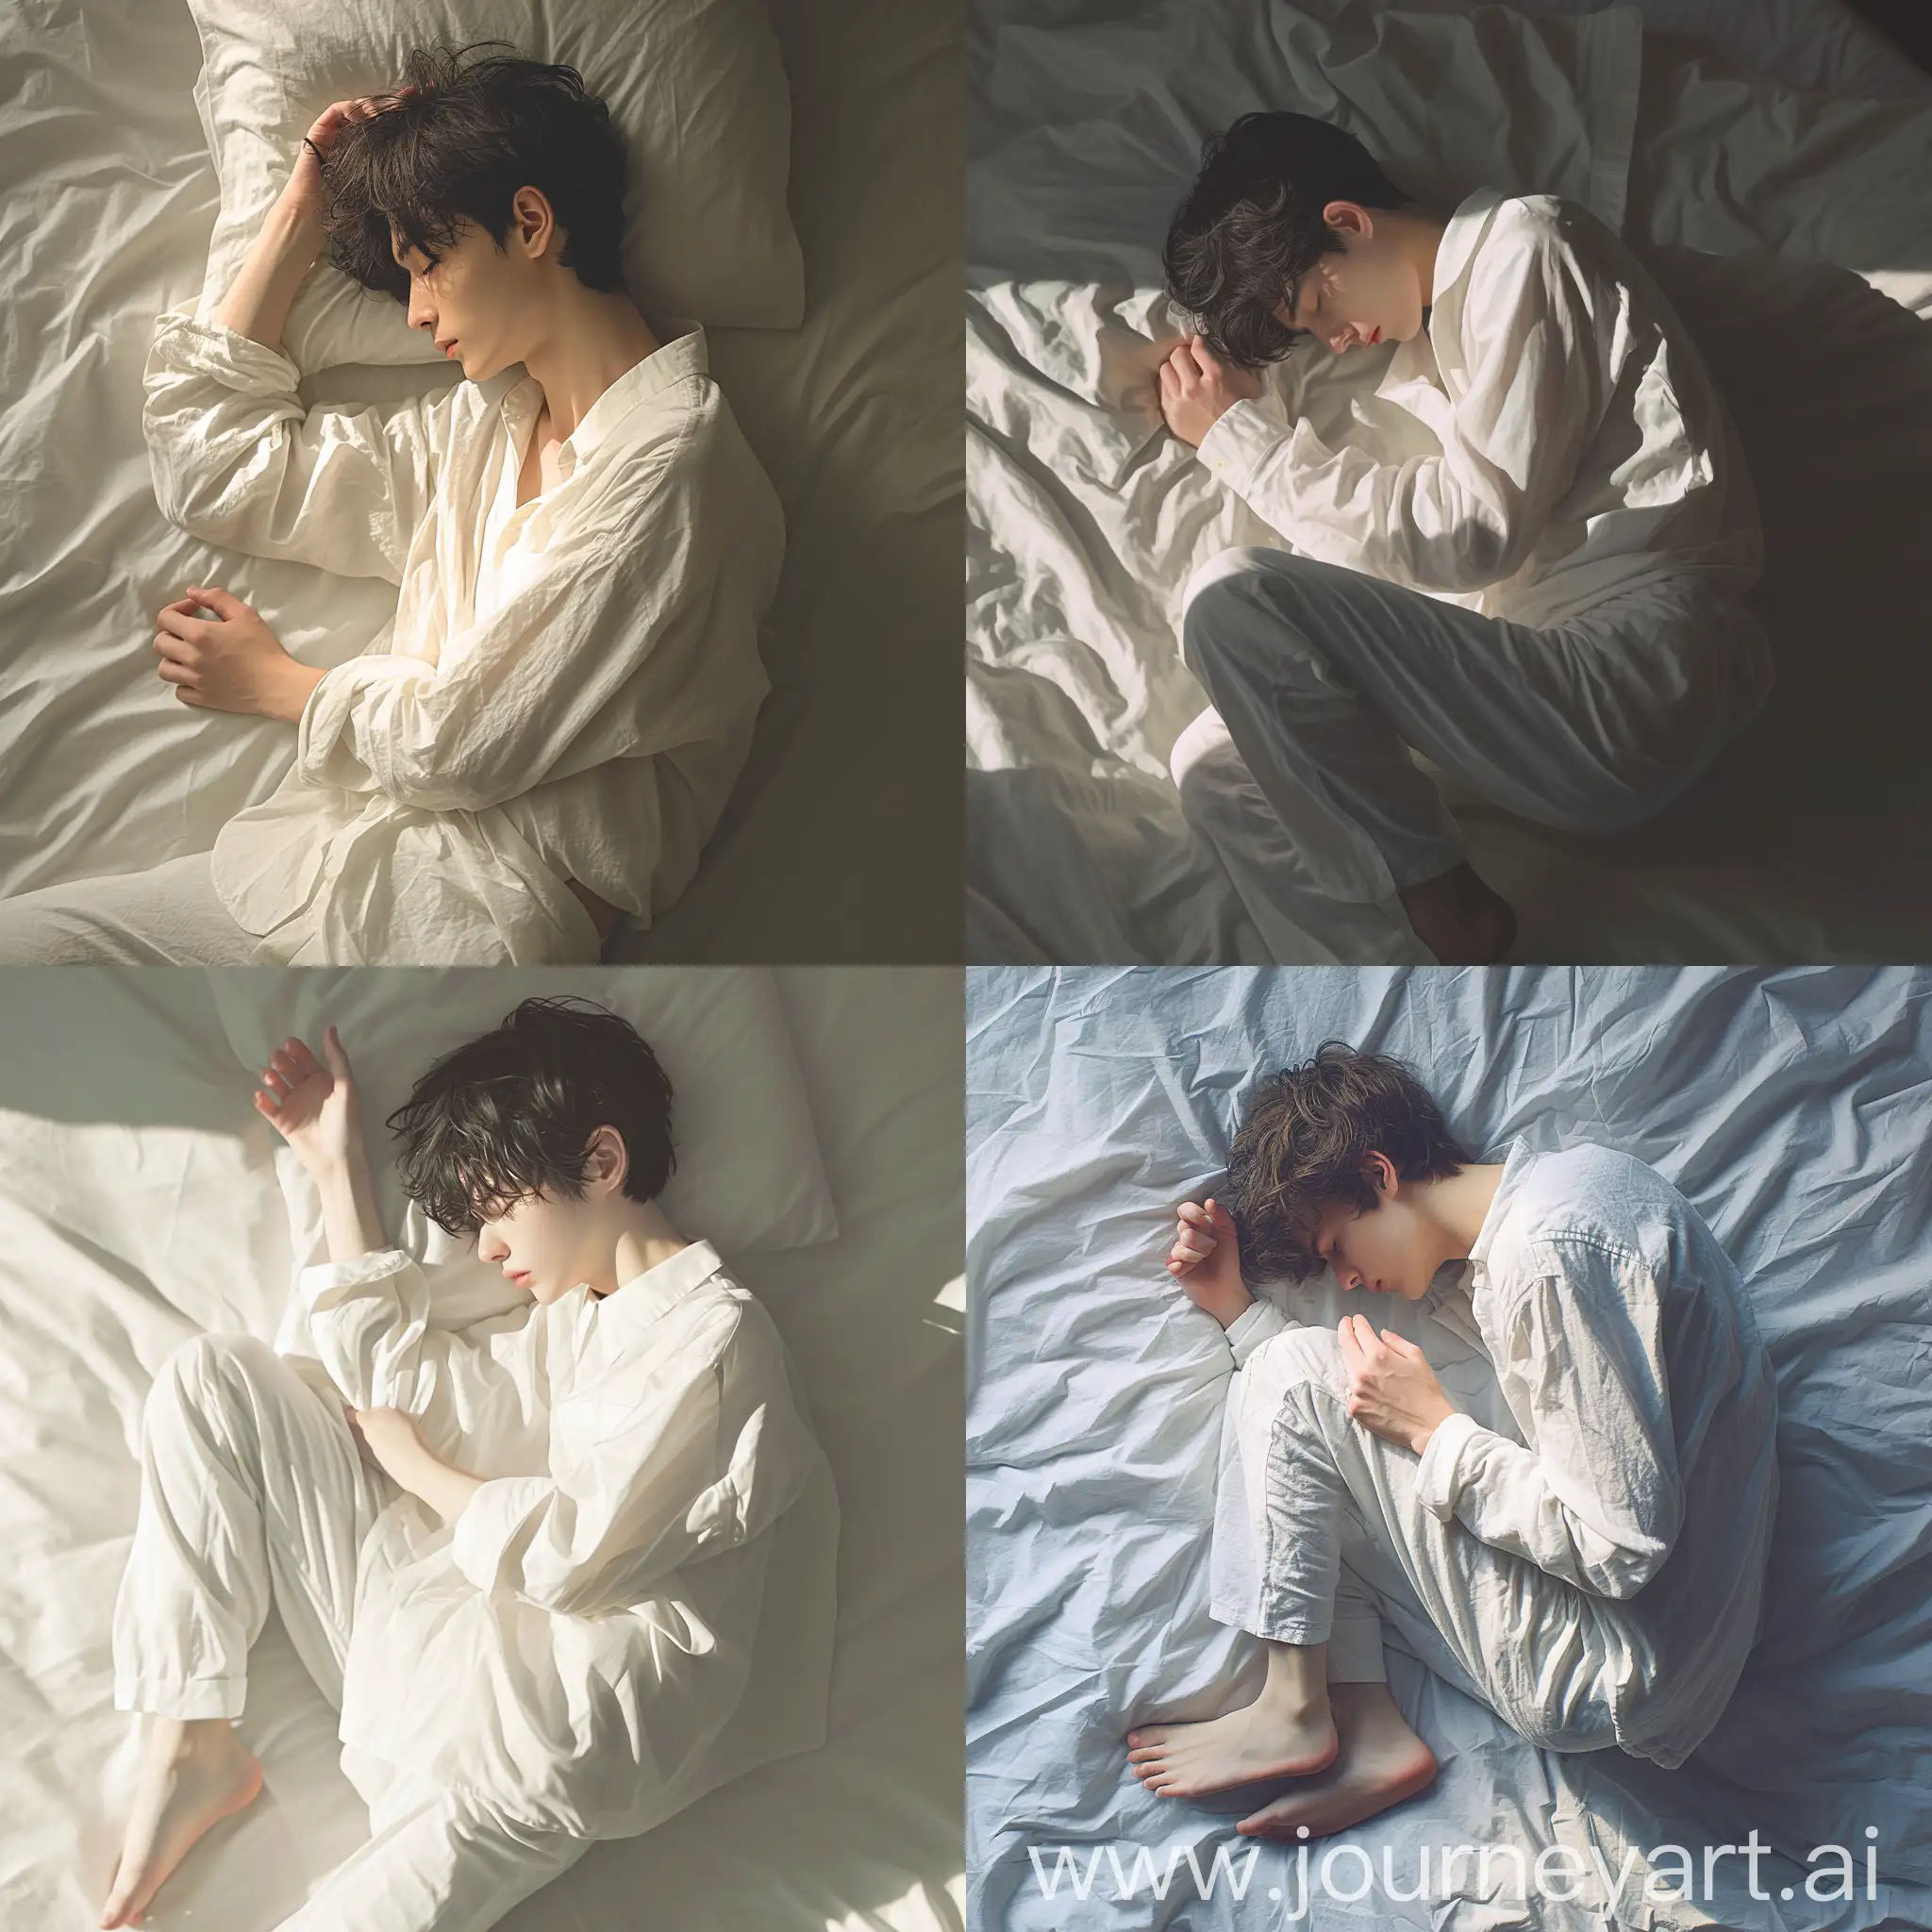 Peaceful-Slumber-Serene-Young-Man-Resting-in-White-Attire